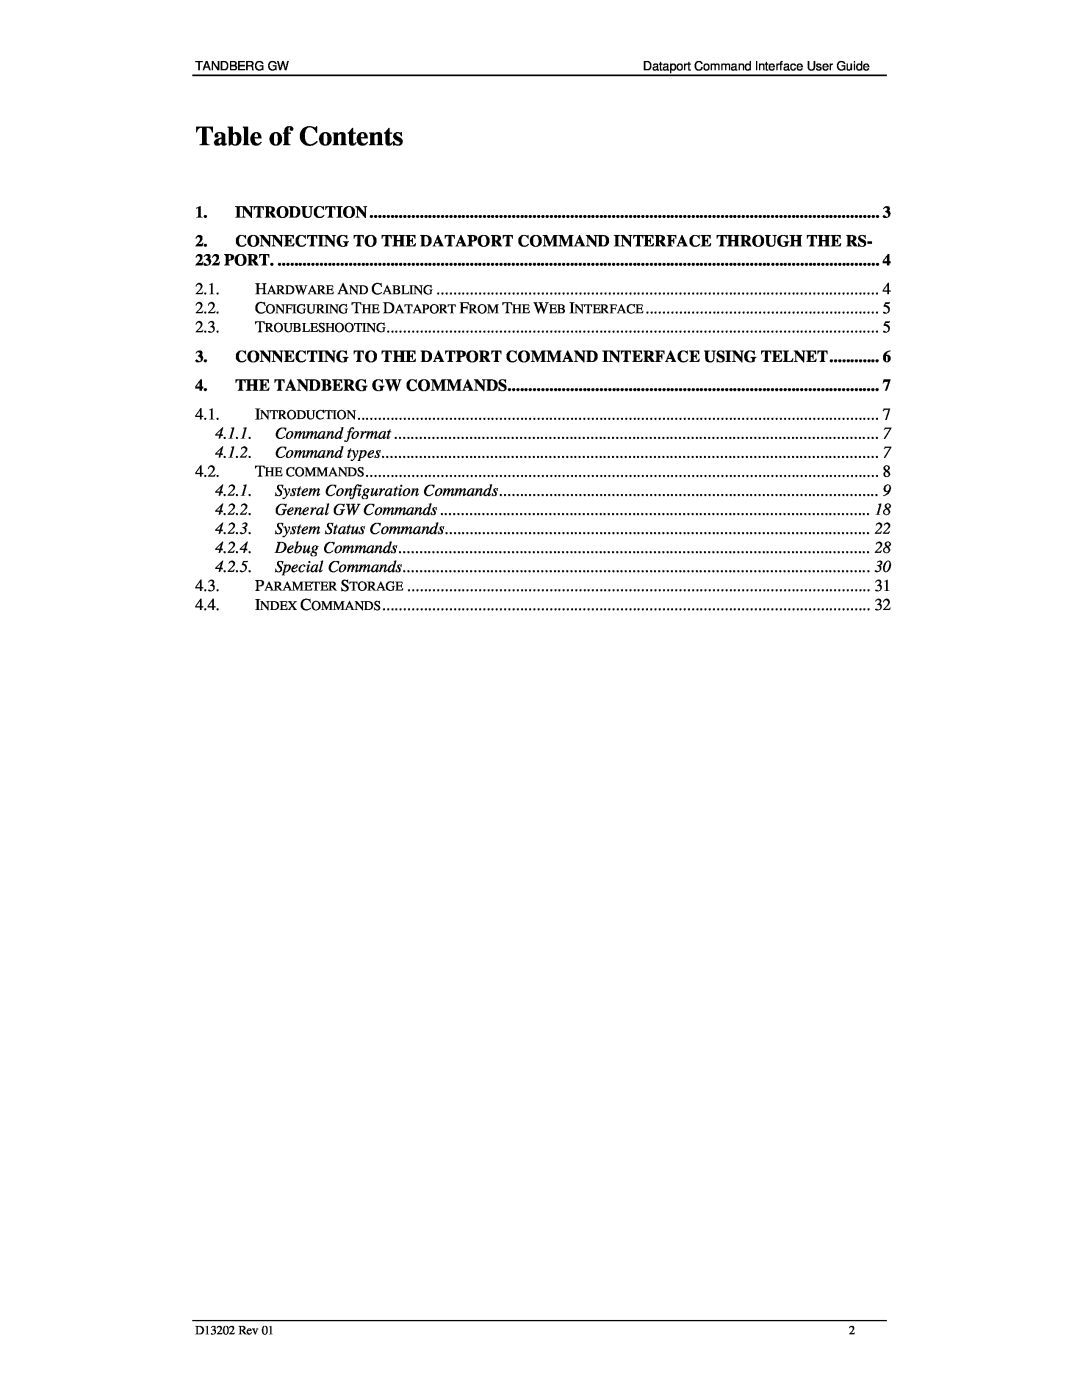 TANDBERG D13202 manual Table of Contents, Introduction, Connecting To The Dataport Command Interface Through The Rs, Port 